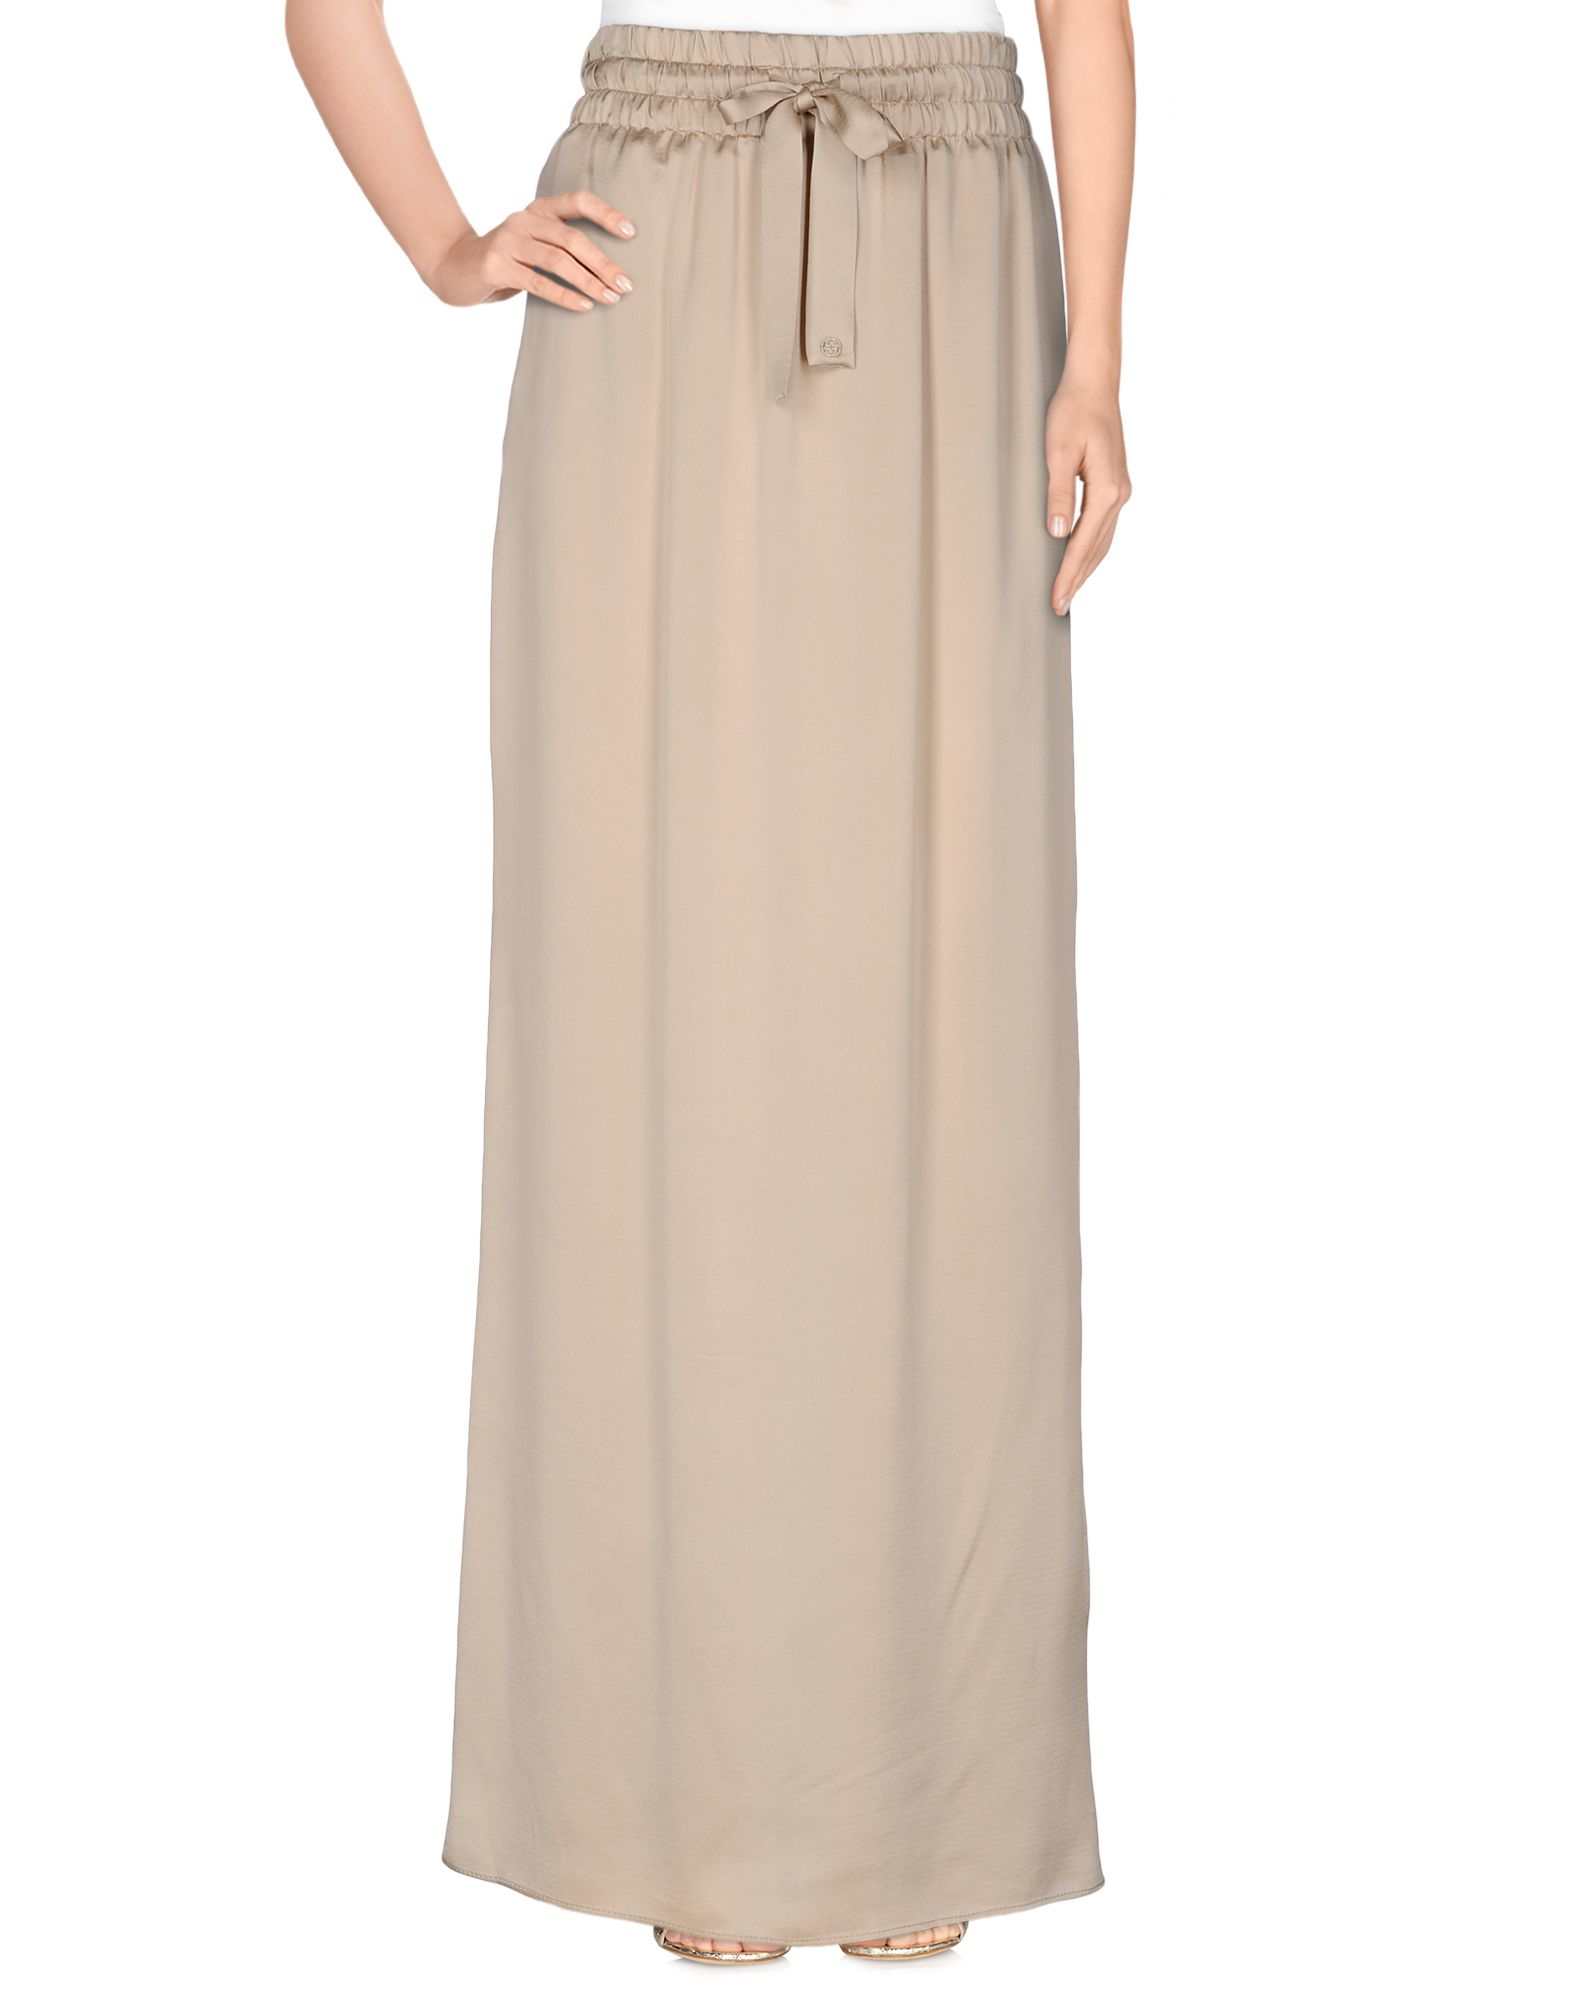 Lyst - Gucci Long Skirt in Natural